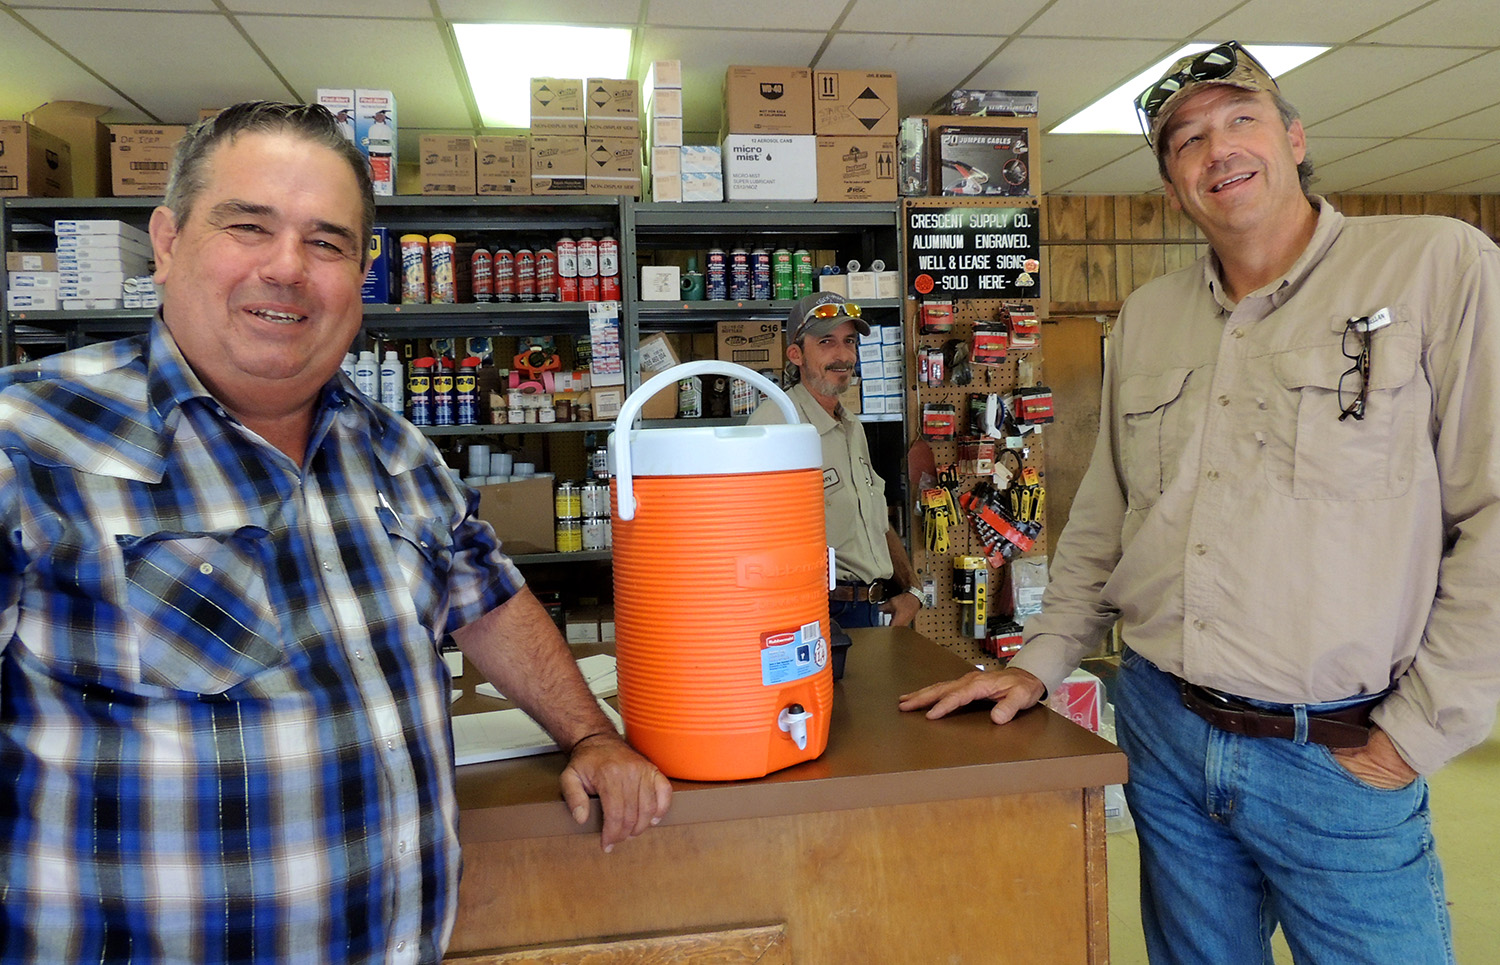 The proverbial oilfield water can is worth a laugh amid the banter at Crescent Supply Co. in Abilene. "If you ever drink out of that water can, it's like cocaine," said customer Derrell Riggan, right, referring to the addictive nature of working in the oil industry. "You can't get off of it," said Scott Tarpley, Crescent manager. "You're done." Behind the counter is Rickey Weaver, assistant manager. Riggan owns DWR Oil Co. in Merkel. PHOTO BY HANABA MUNN WELCH